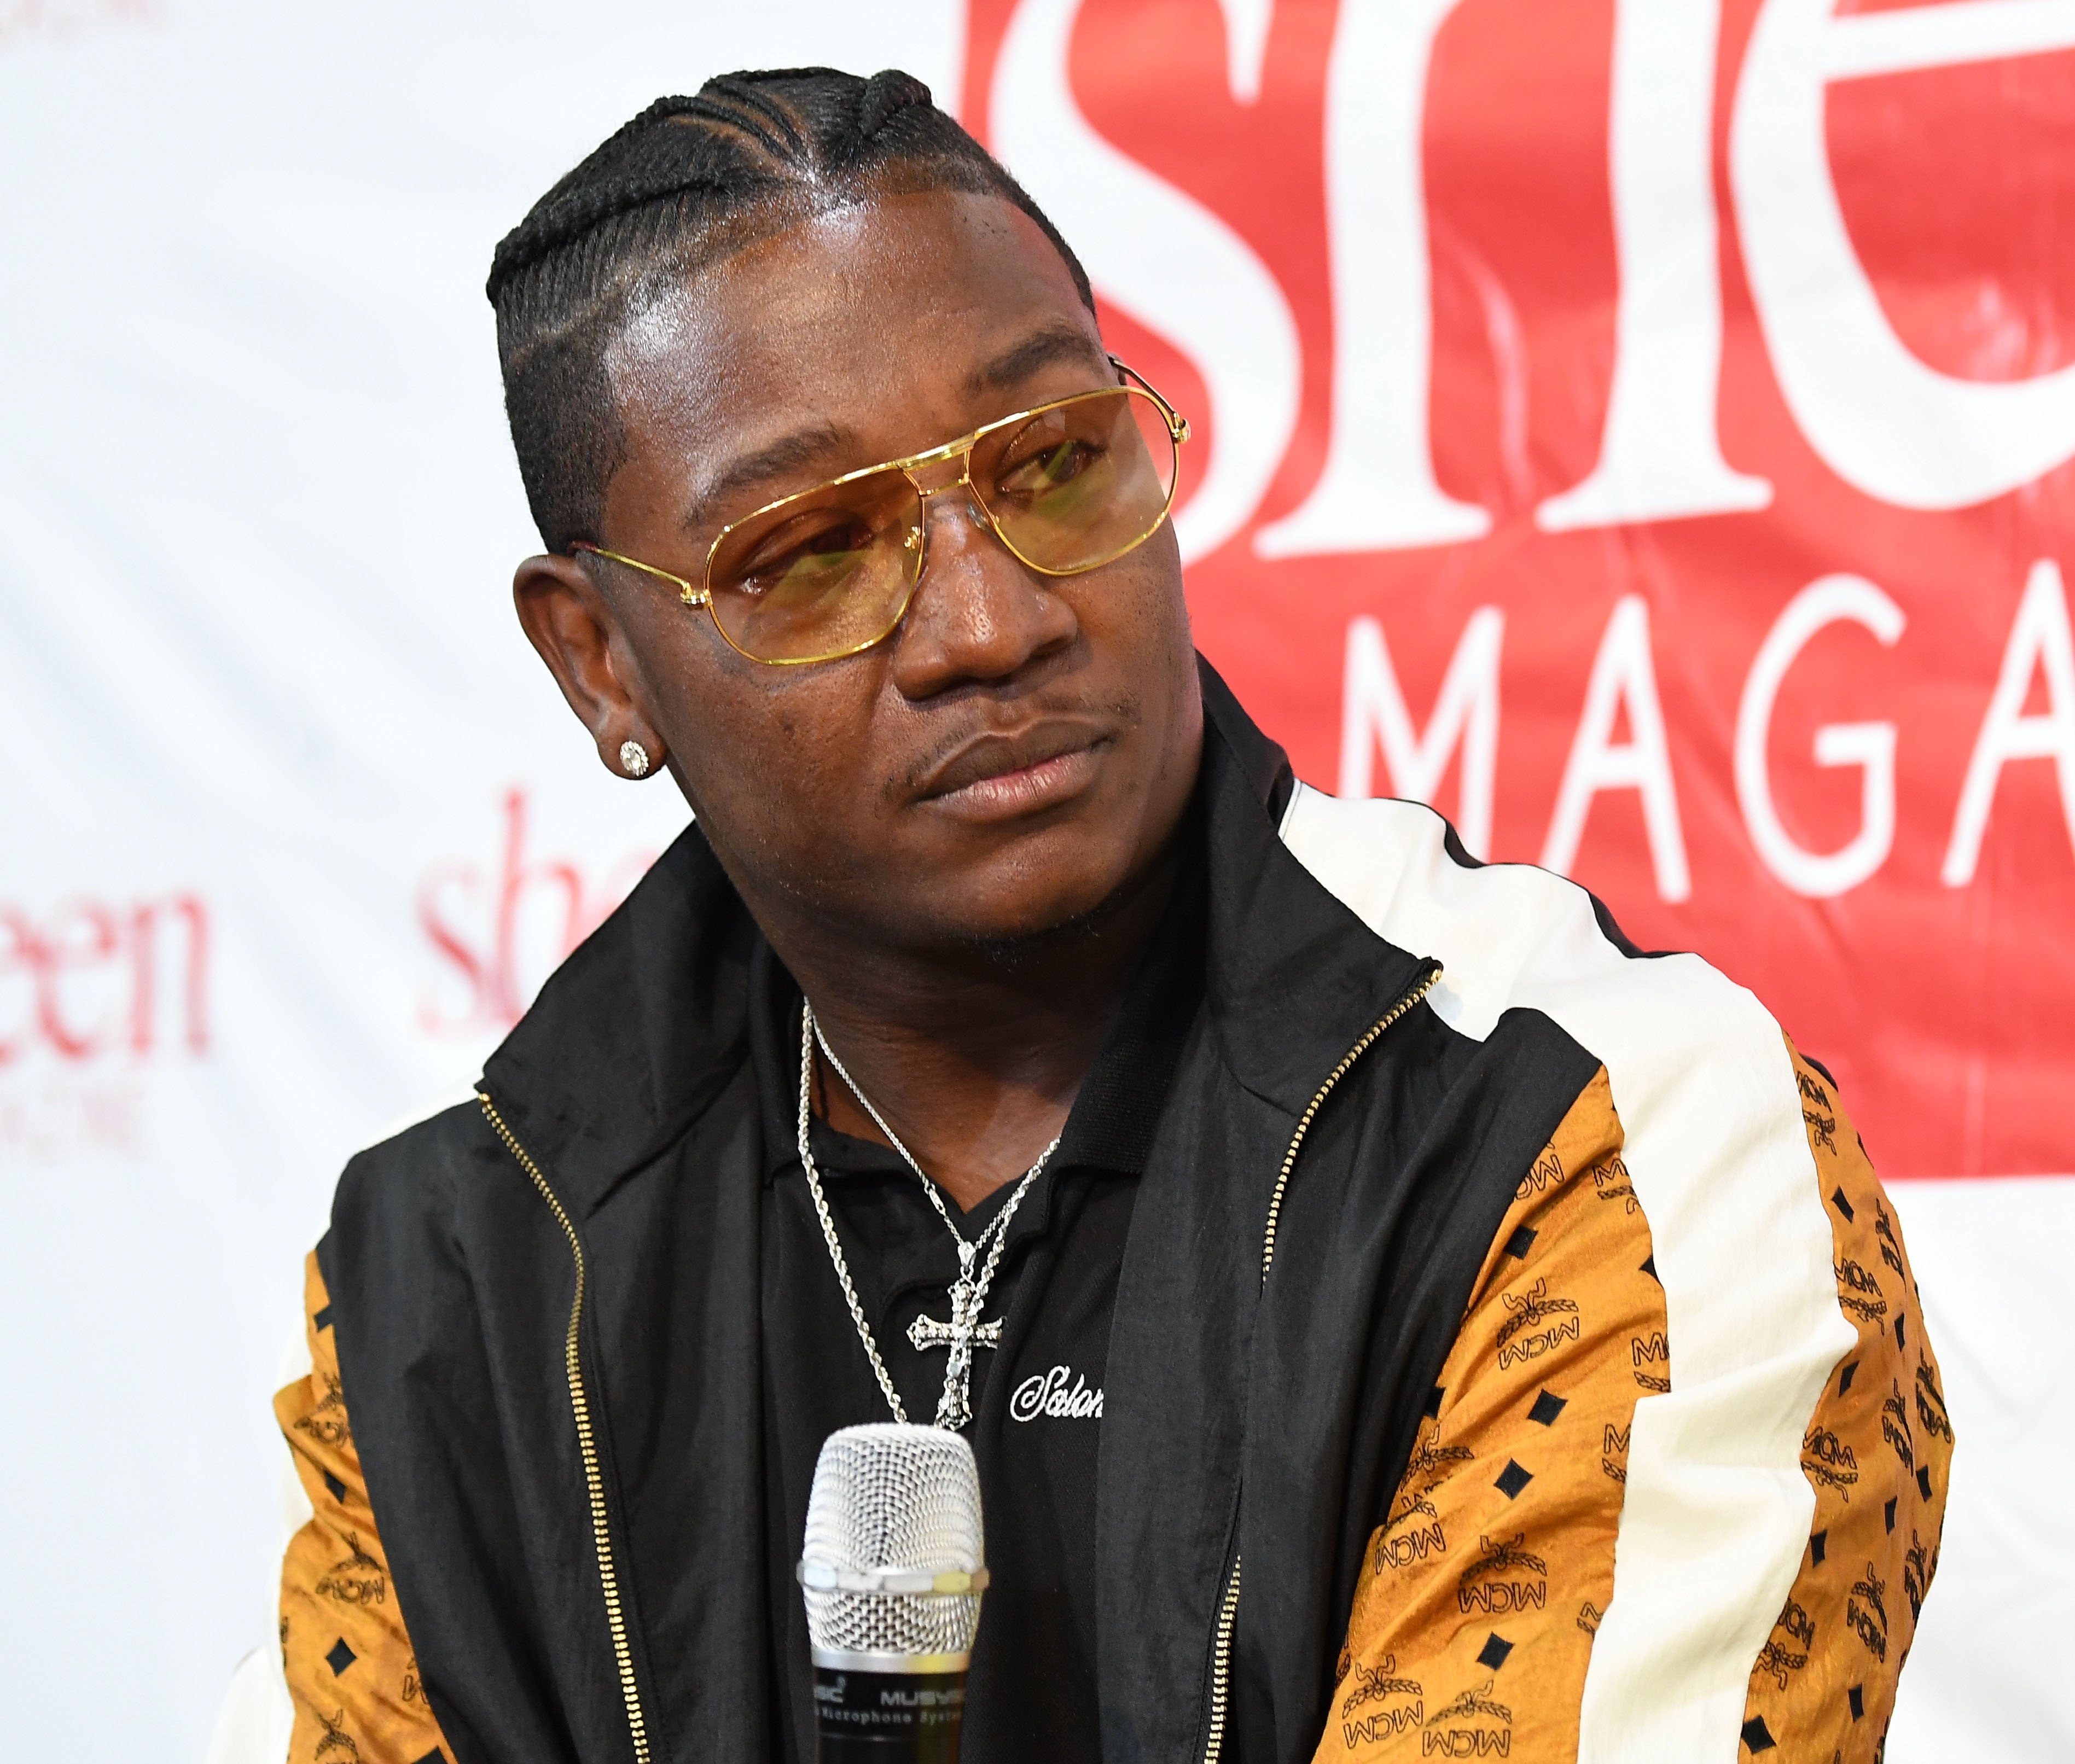 Rapper Yung Joc speaking at the 2018 Bronner Brothers International Beauty Show in Atlanta. | Photo: Getty Images